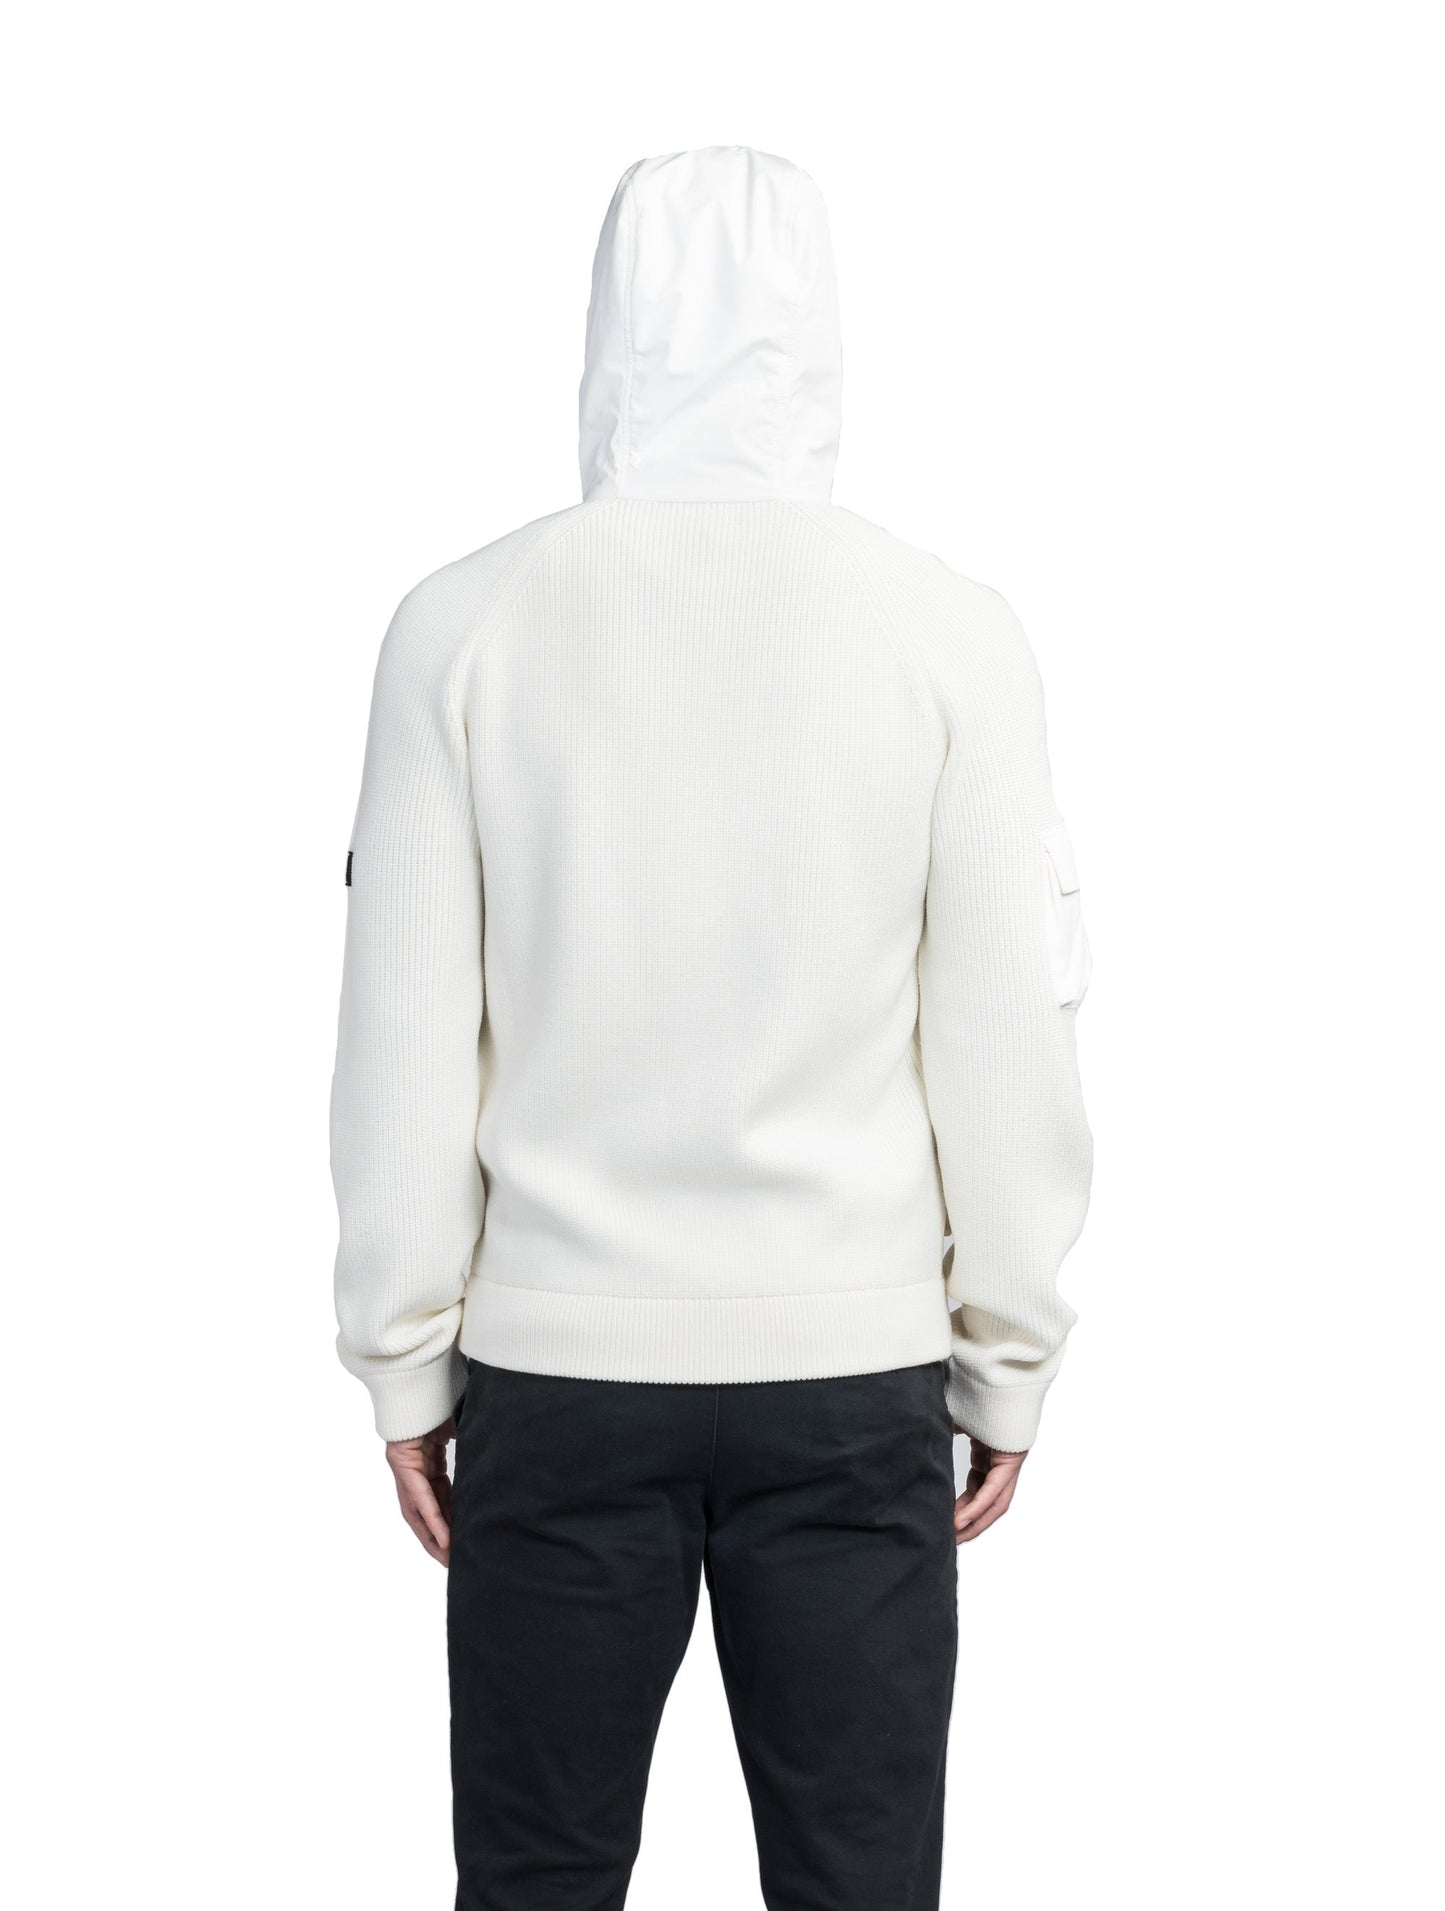 Hedge Men's Performance Hoodie in hip length, premium 3-ply micro denier and 100% virgin extra fine merino wool knit fabrication, Primaloft Gold Insulation Active+, non-removable hood with adjustable drawstrings, two-way centre-front zipper, magnetic closure side-entry pockets at waist, in Chalk